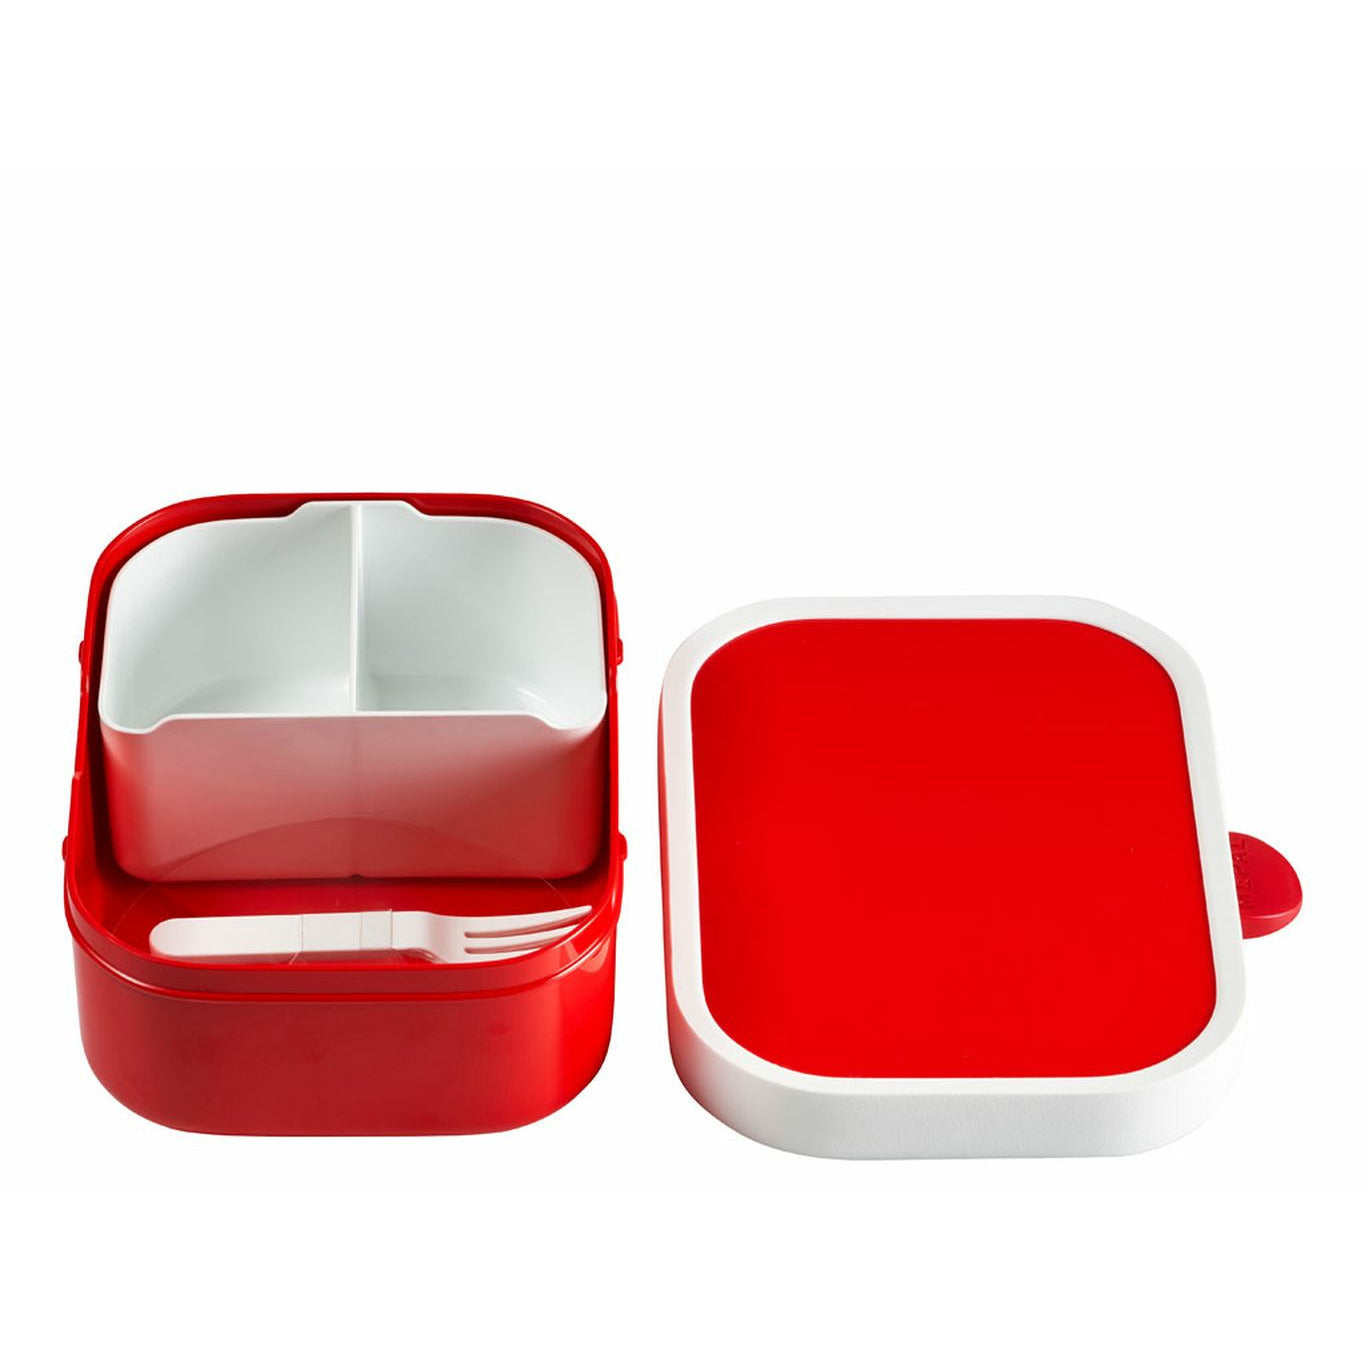 Mepal Campus Campus Lunch Box, Red